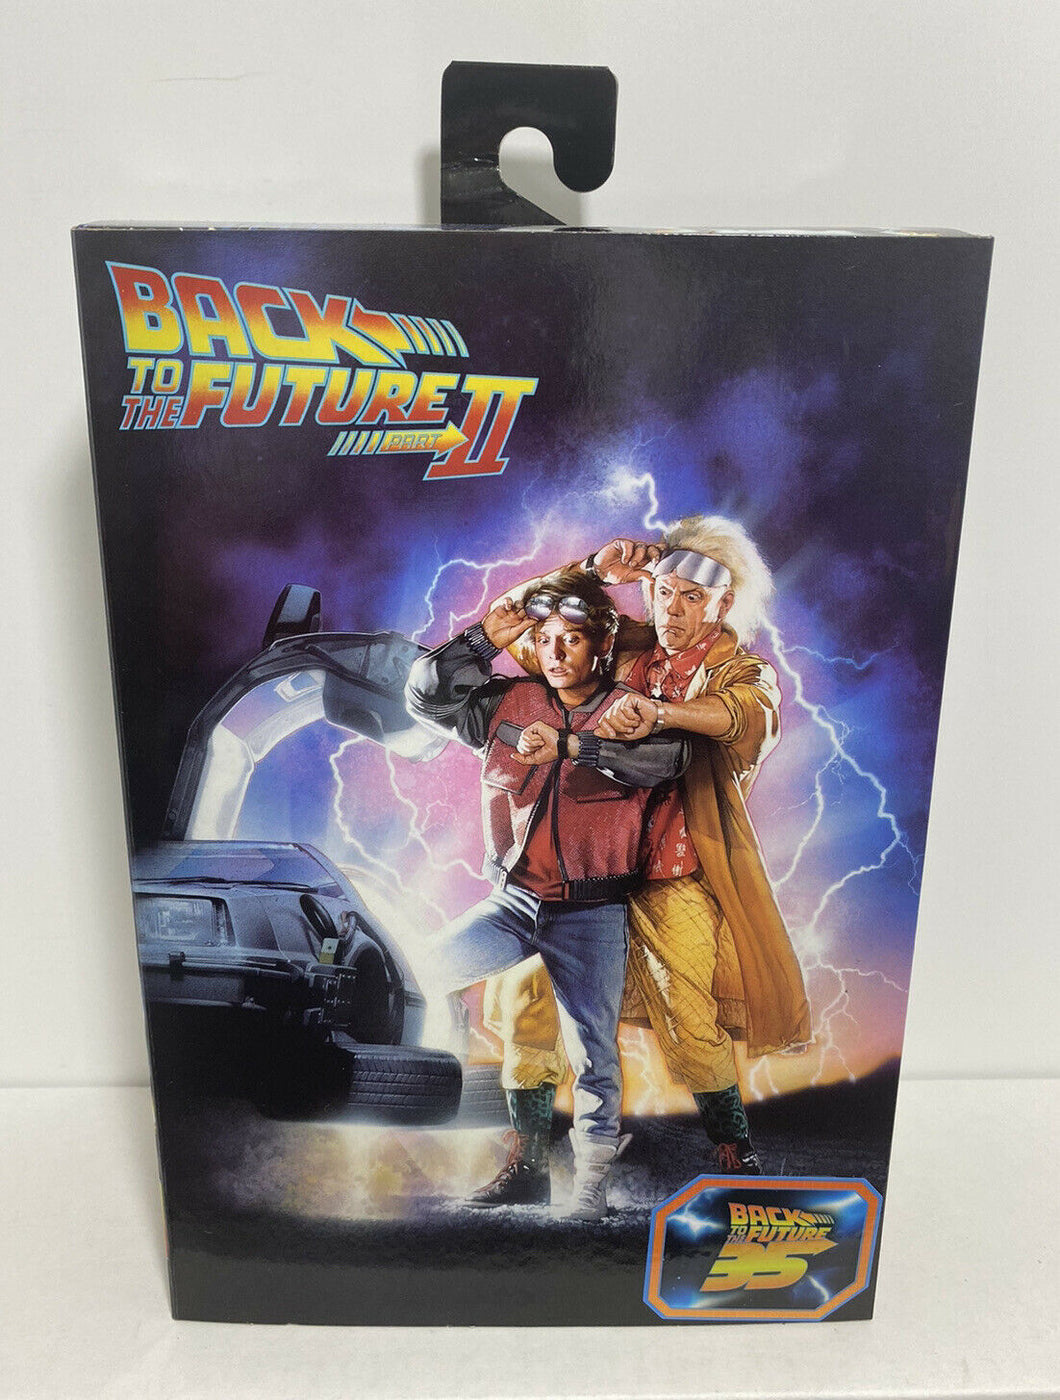 Back to the Future: Part 2- 7